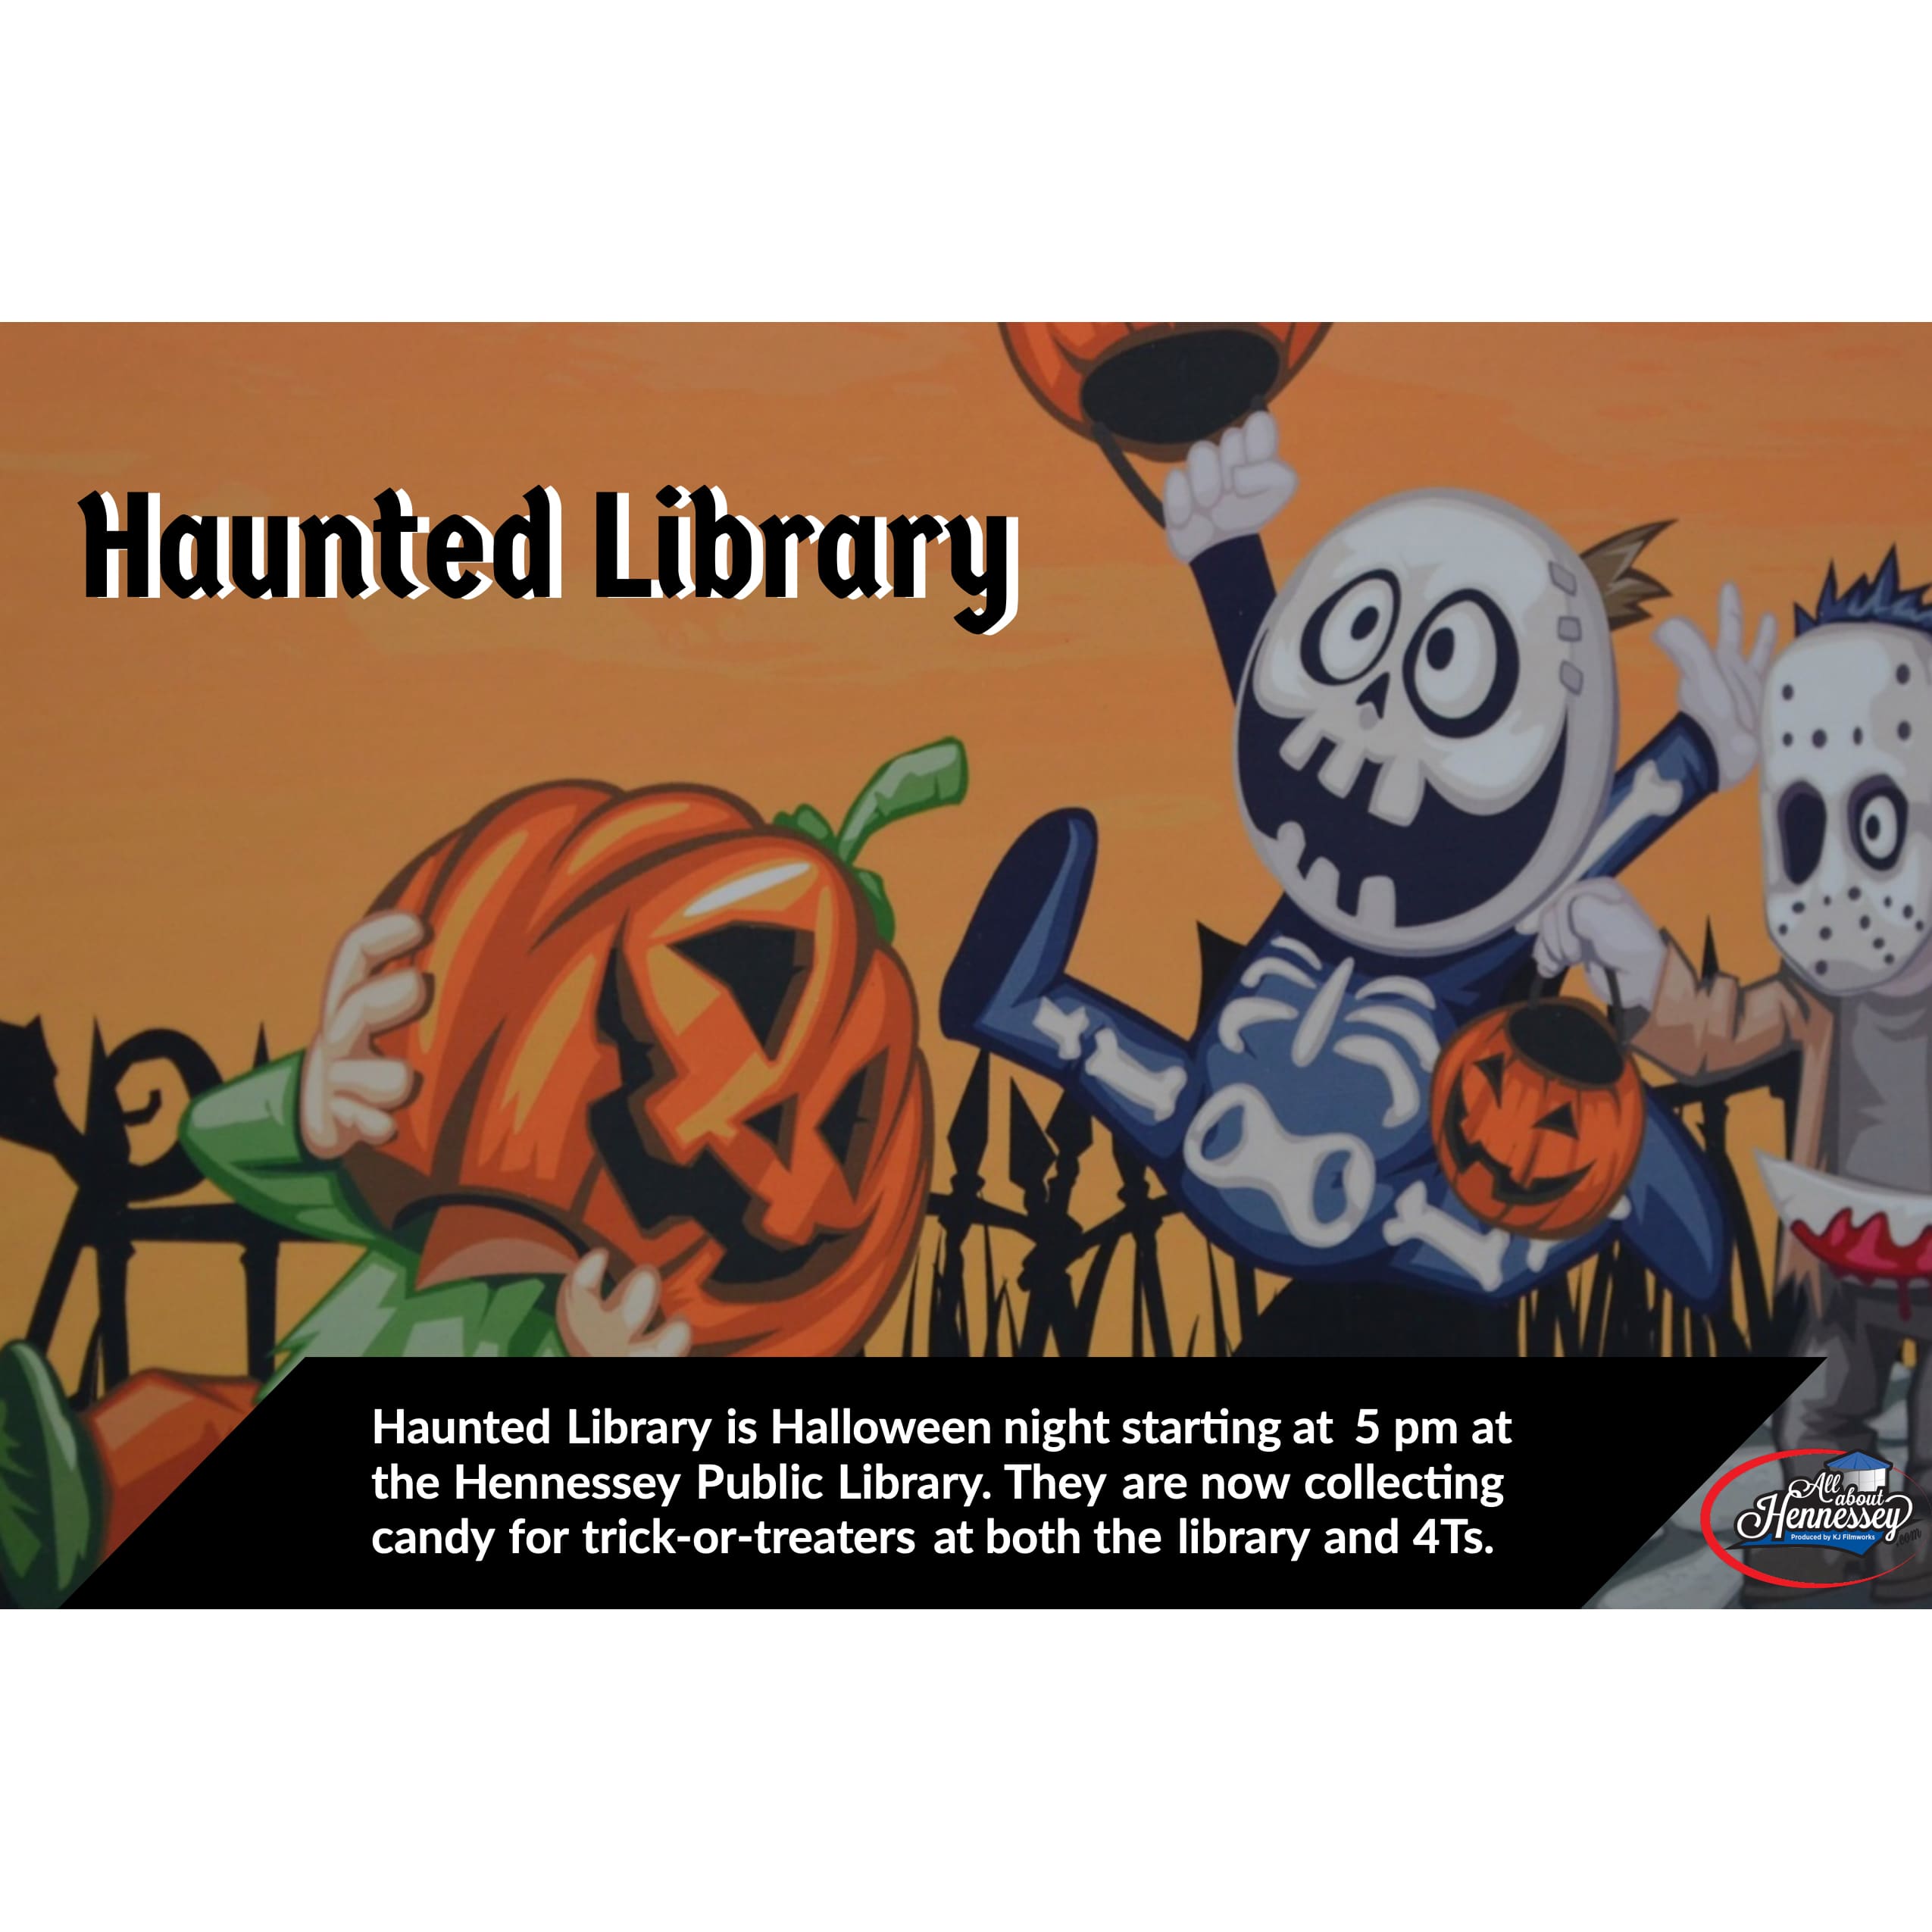 HAUNTED LIBRARY TAKING CANDY DONATIONS!